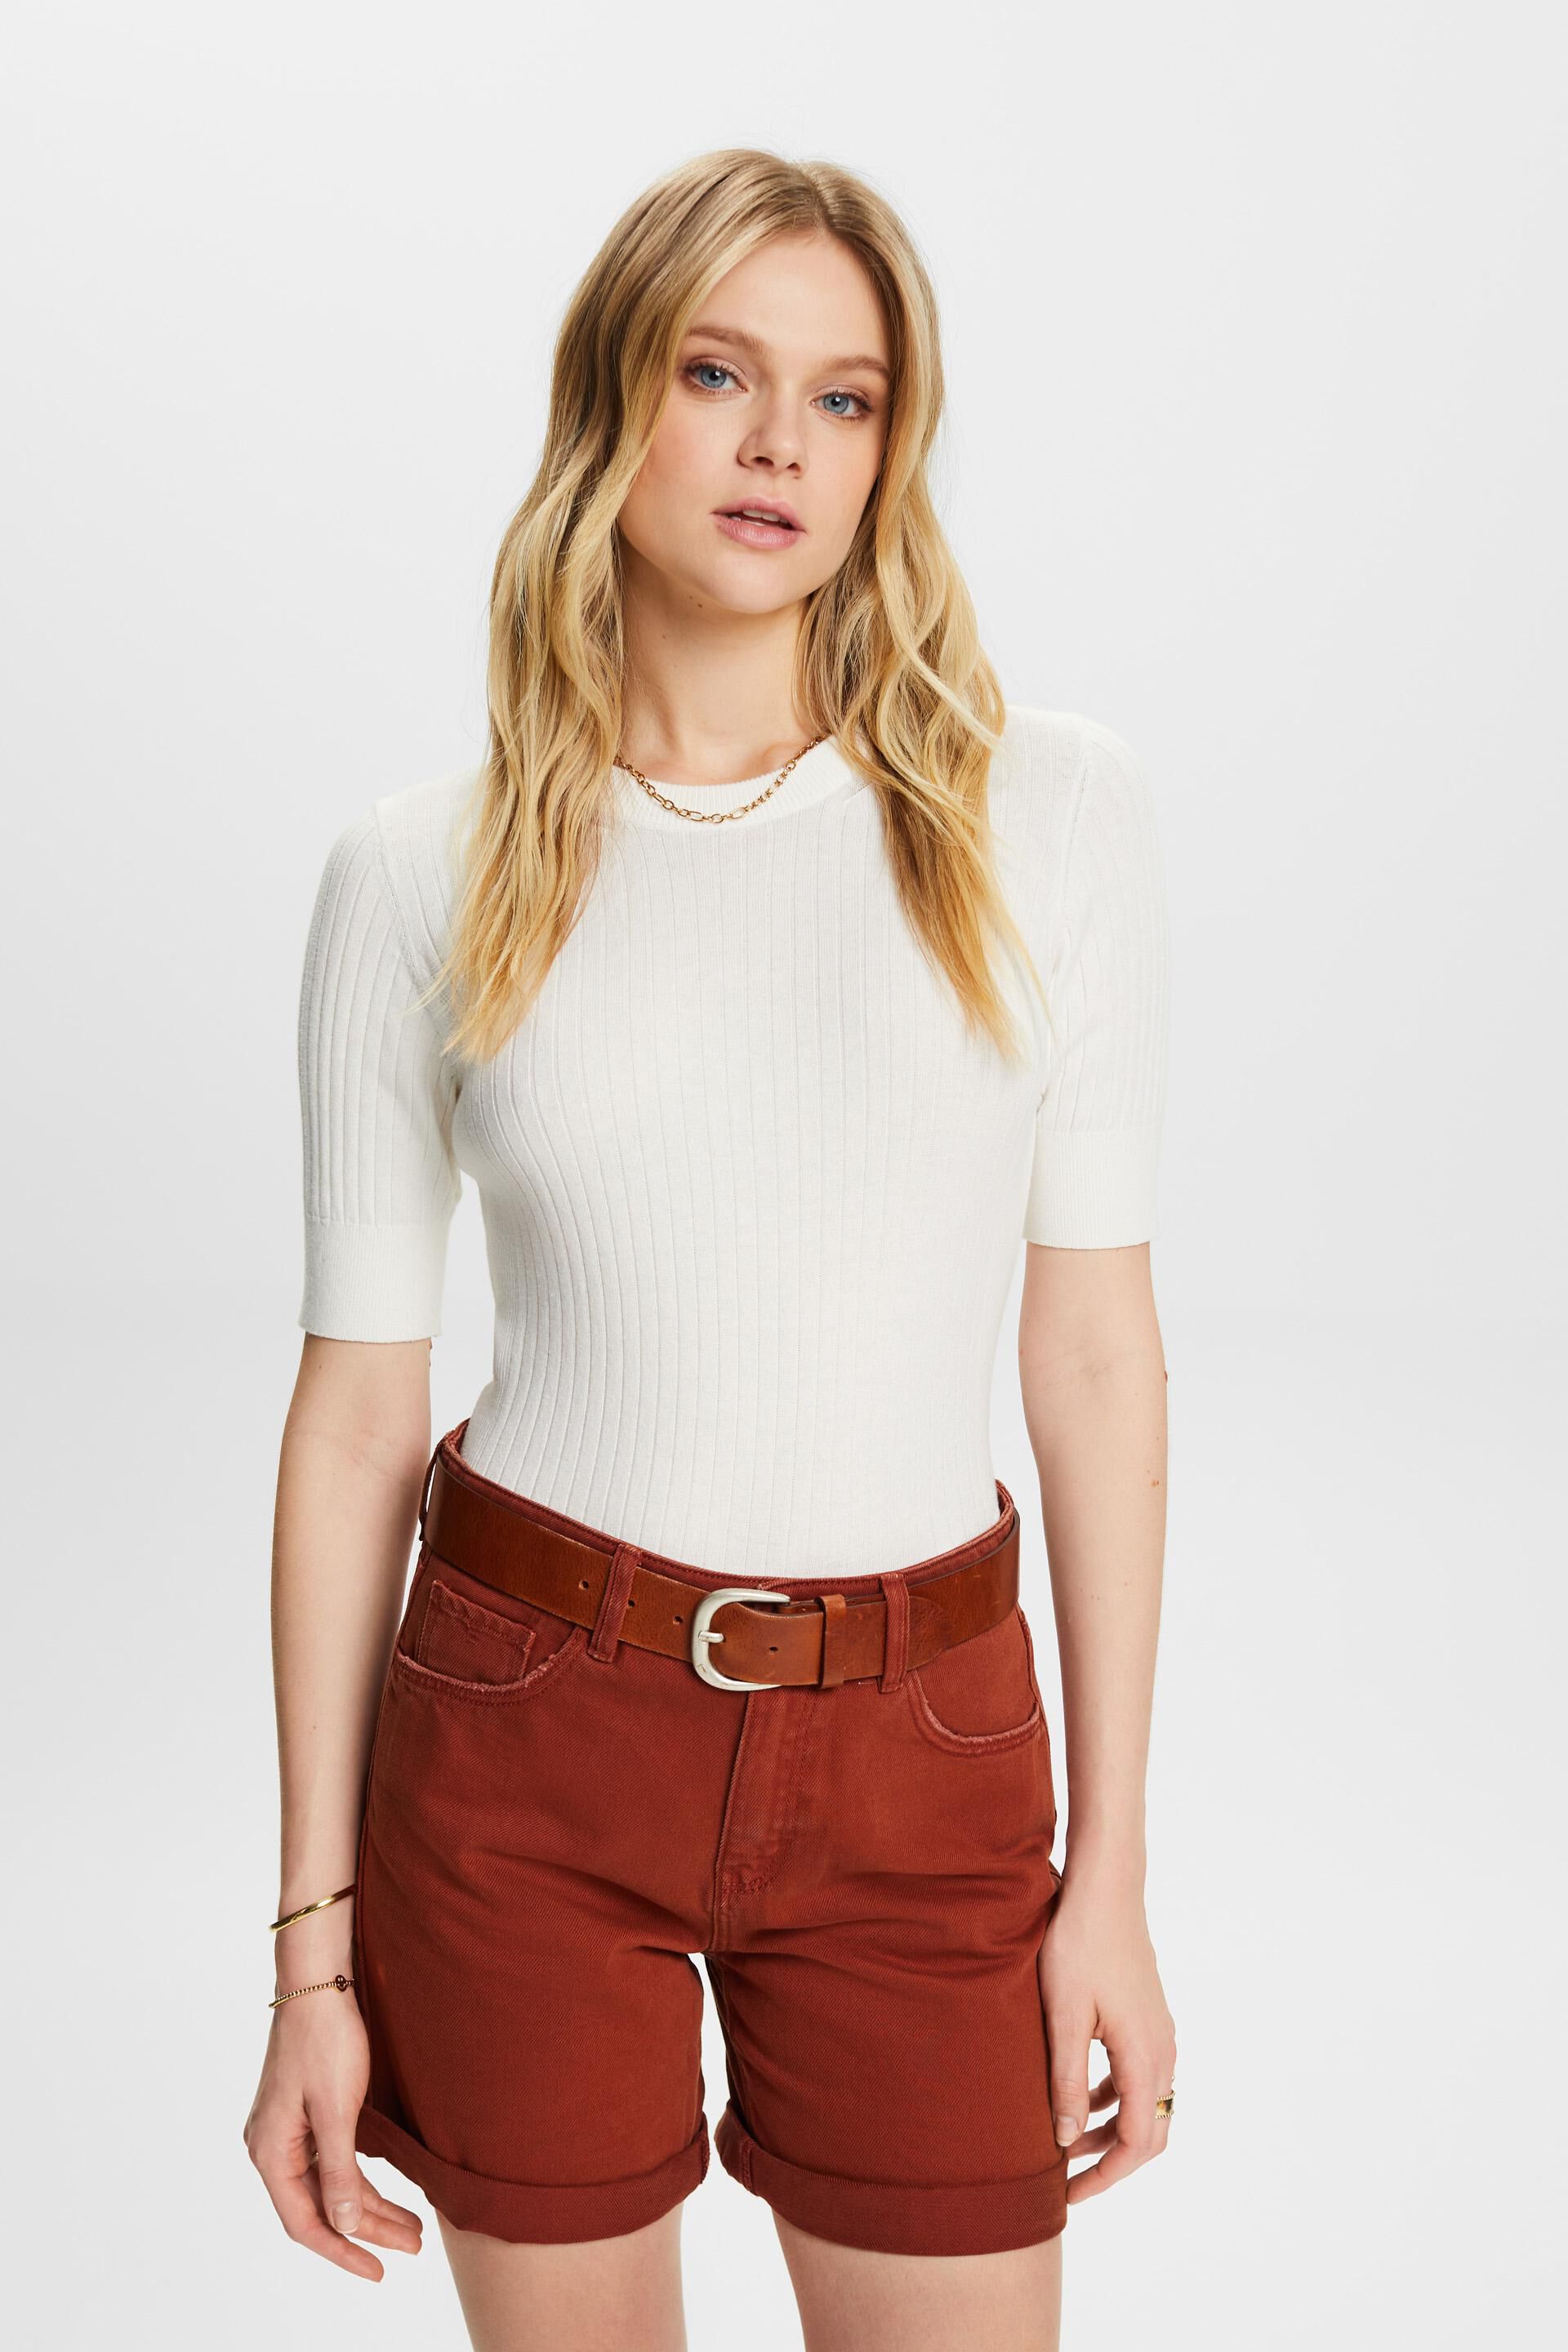 Esprit Short-sleeved sweater ribbed